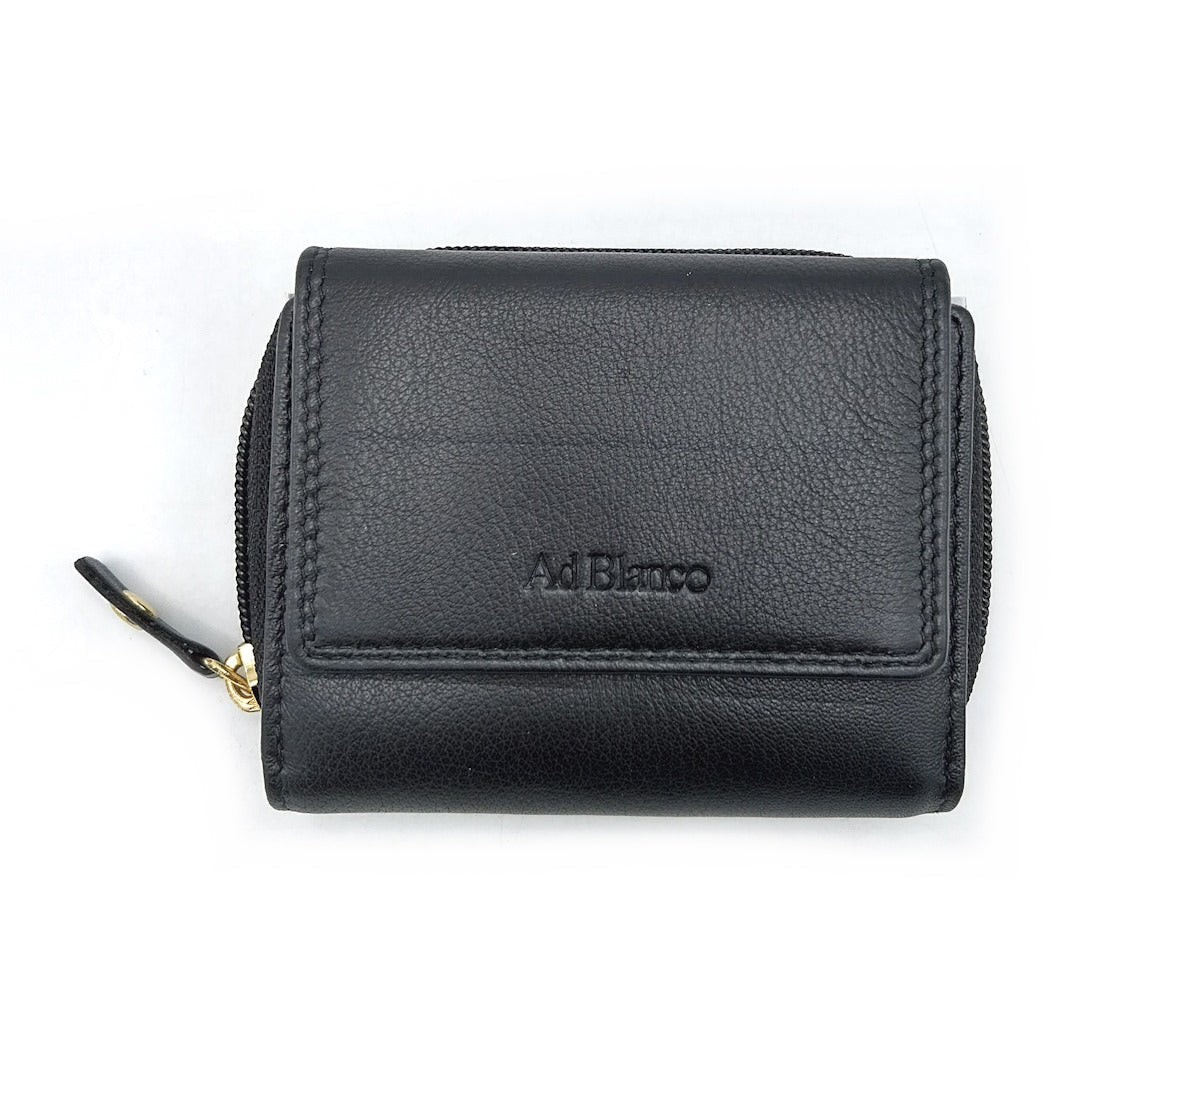 Genuine leather wallet, Ad Blanco, art. 6770.422